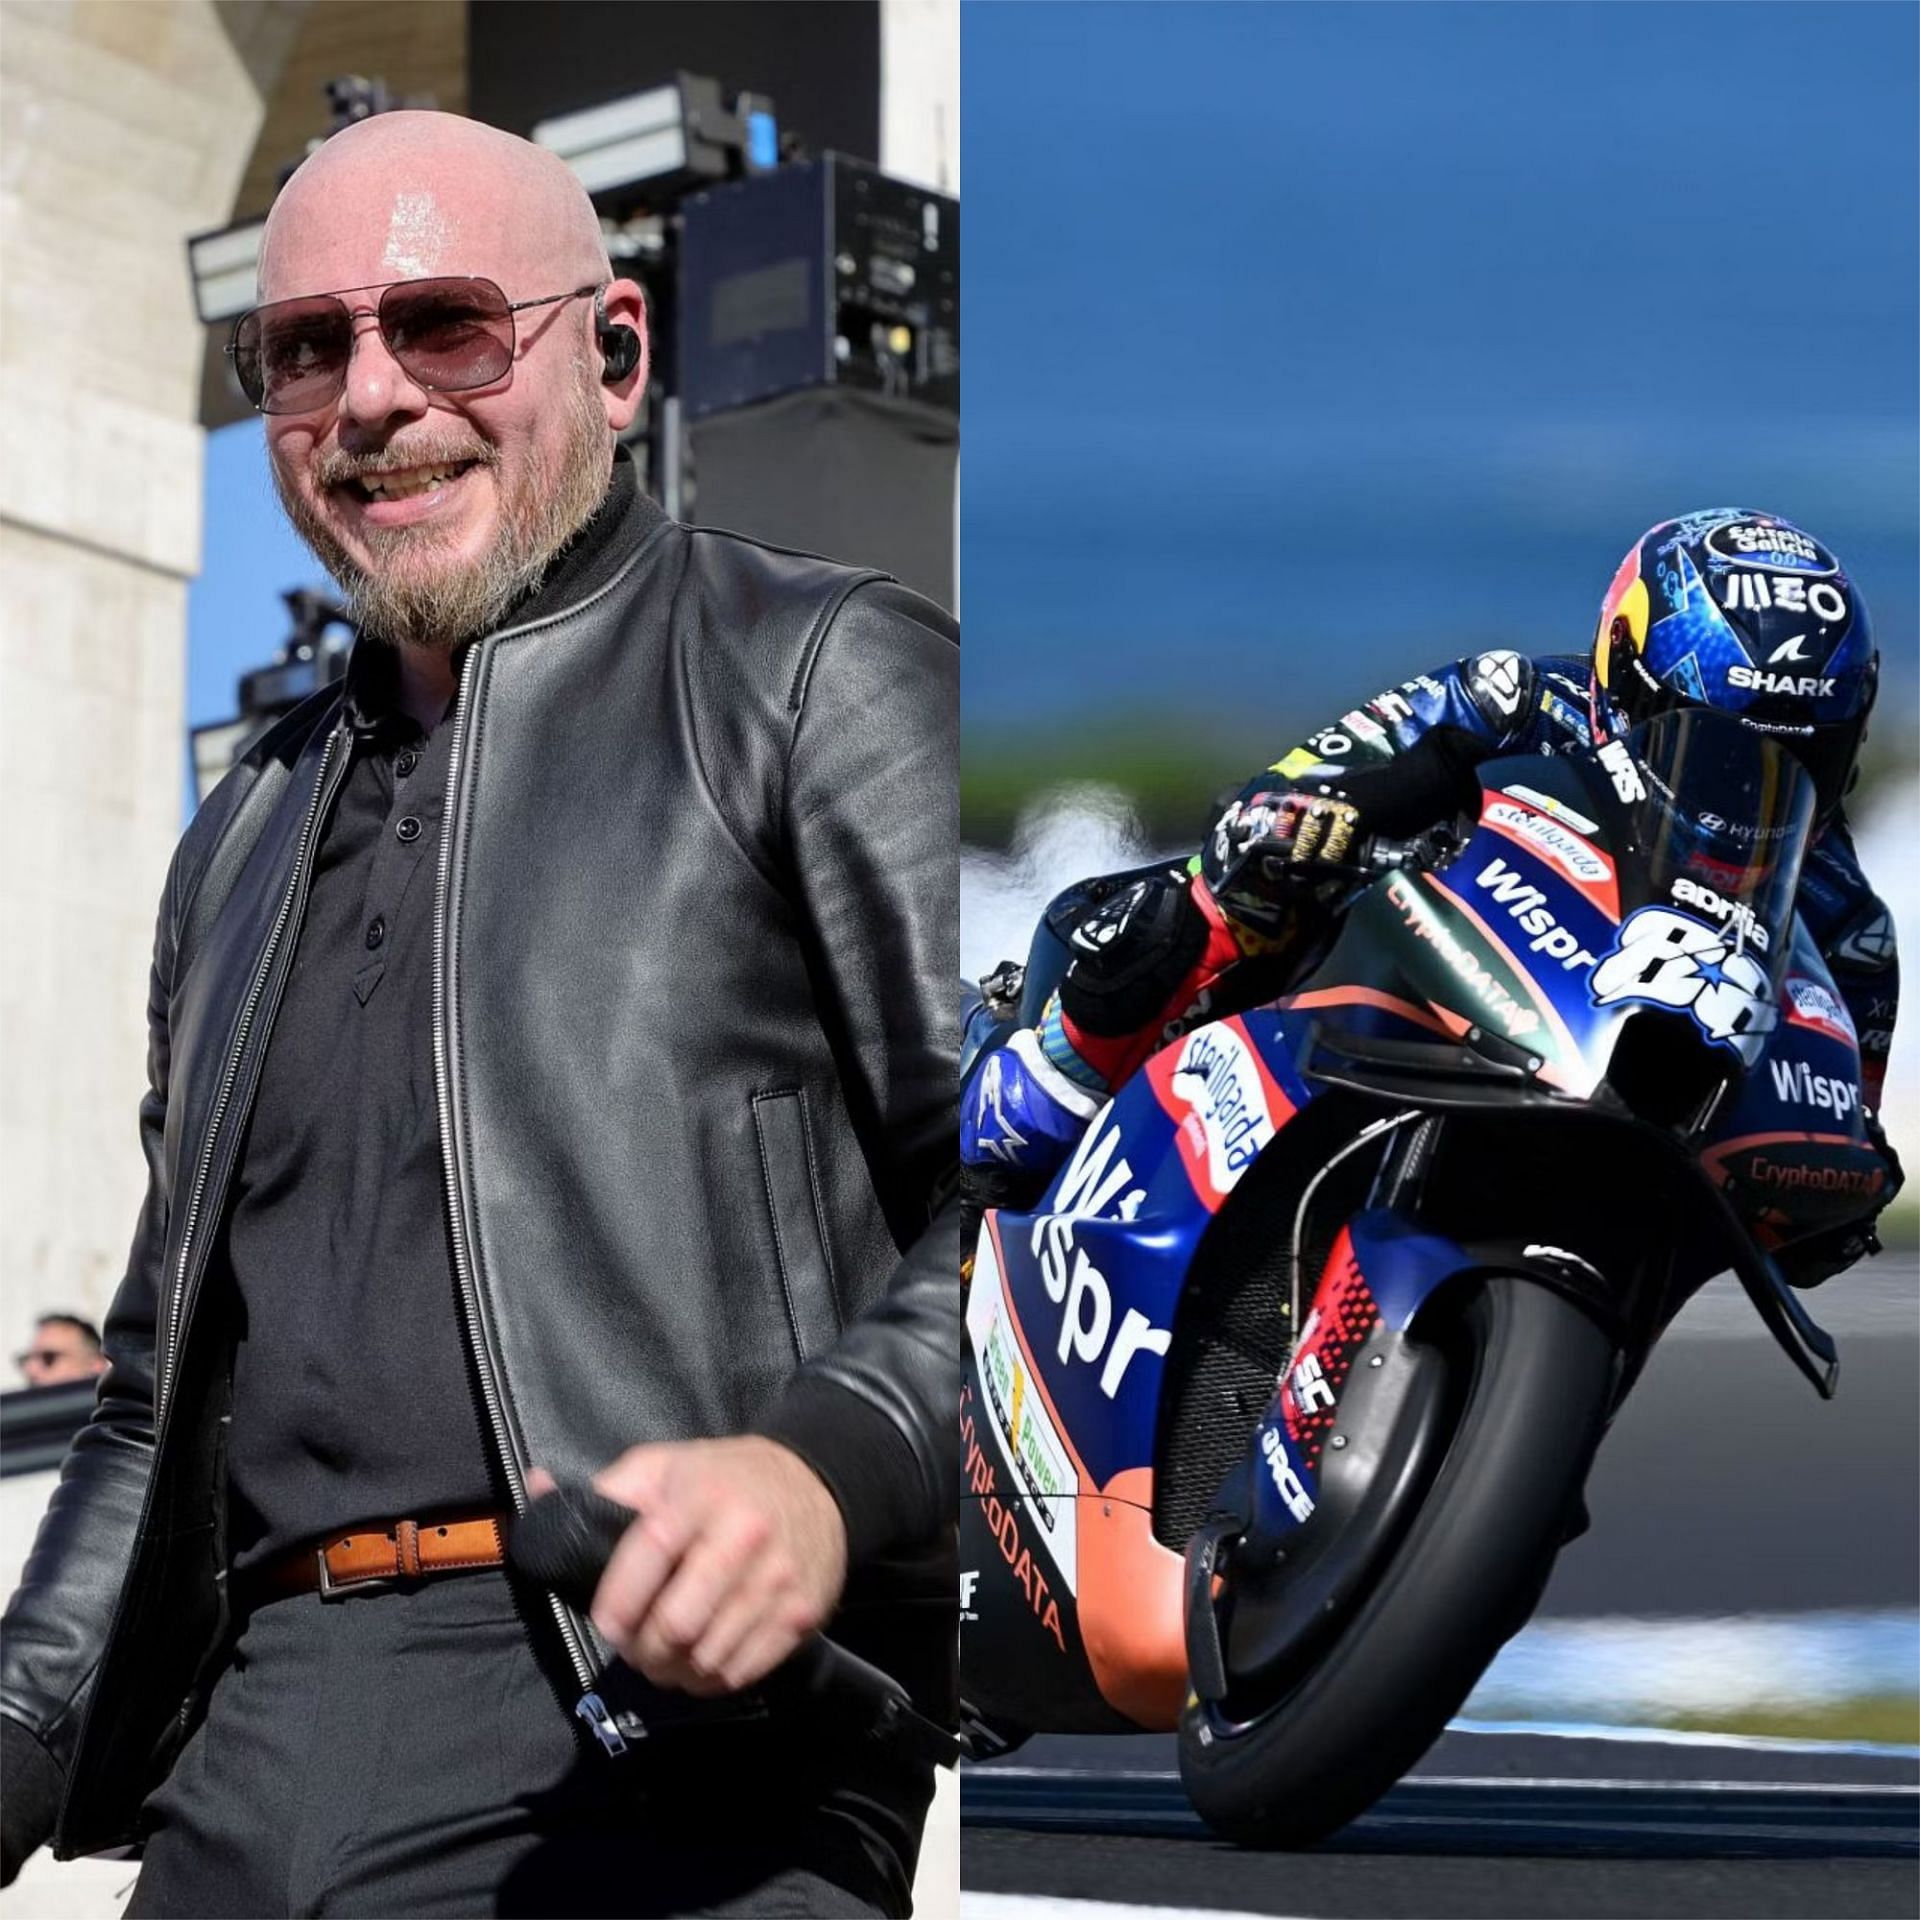 (L-R) Rapper and NASCAR Cup Series team owner Pitbull, Miguel Oliveira of Portugal and the CryptoDATA RNF MotoGP Team in action. (Photo by Quinn Rooney/Kevin Winter - Getty Images)